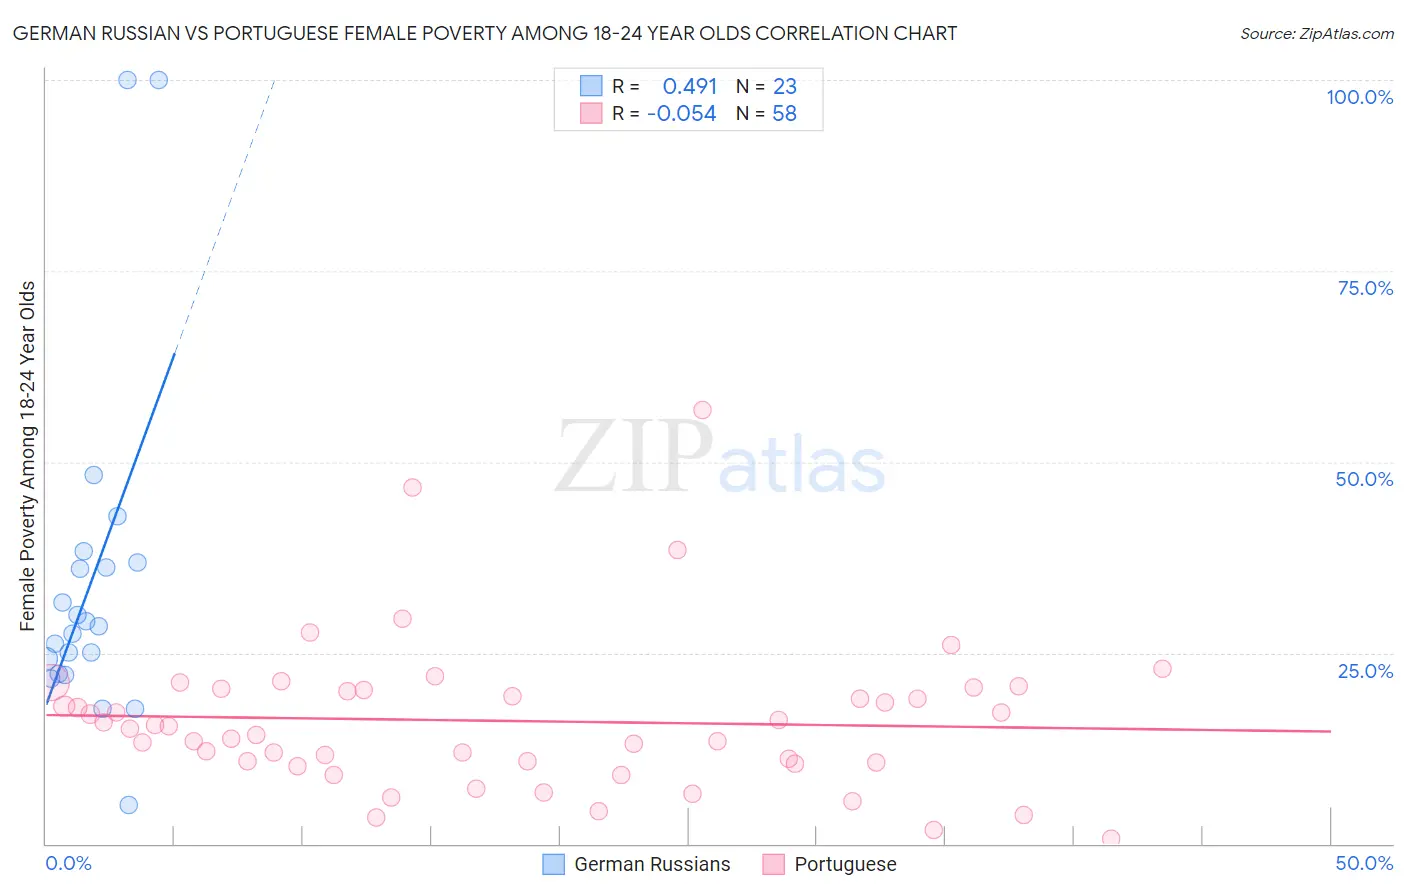 German Russian vs Portuguese Female Poverty Among 18-24 Year Olds